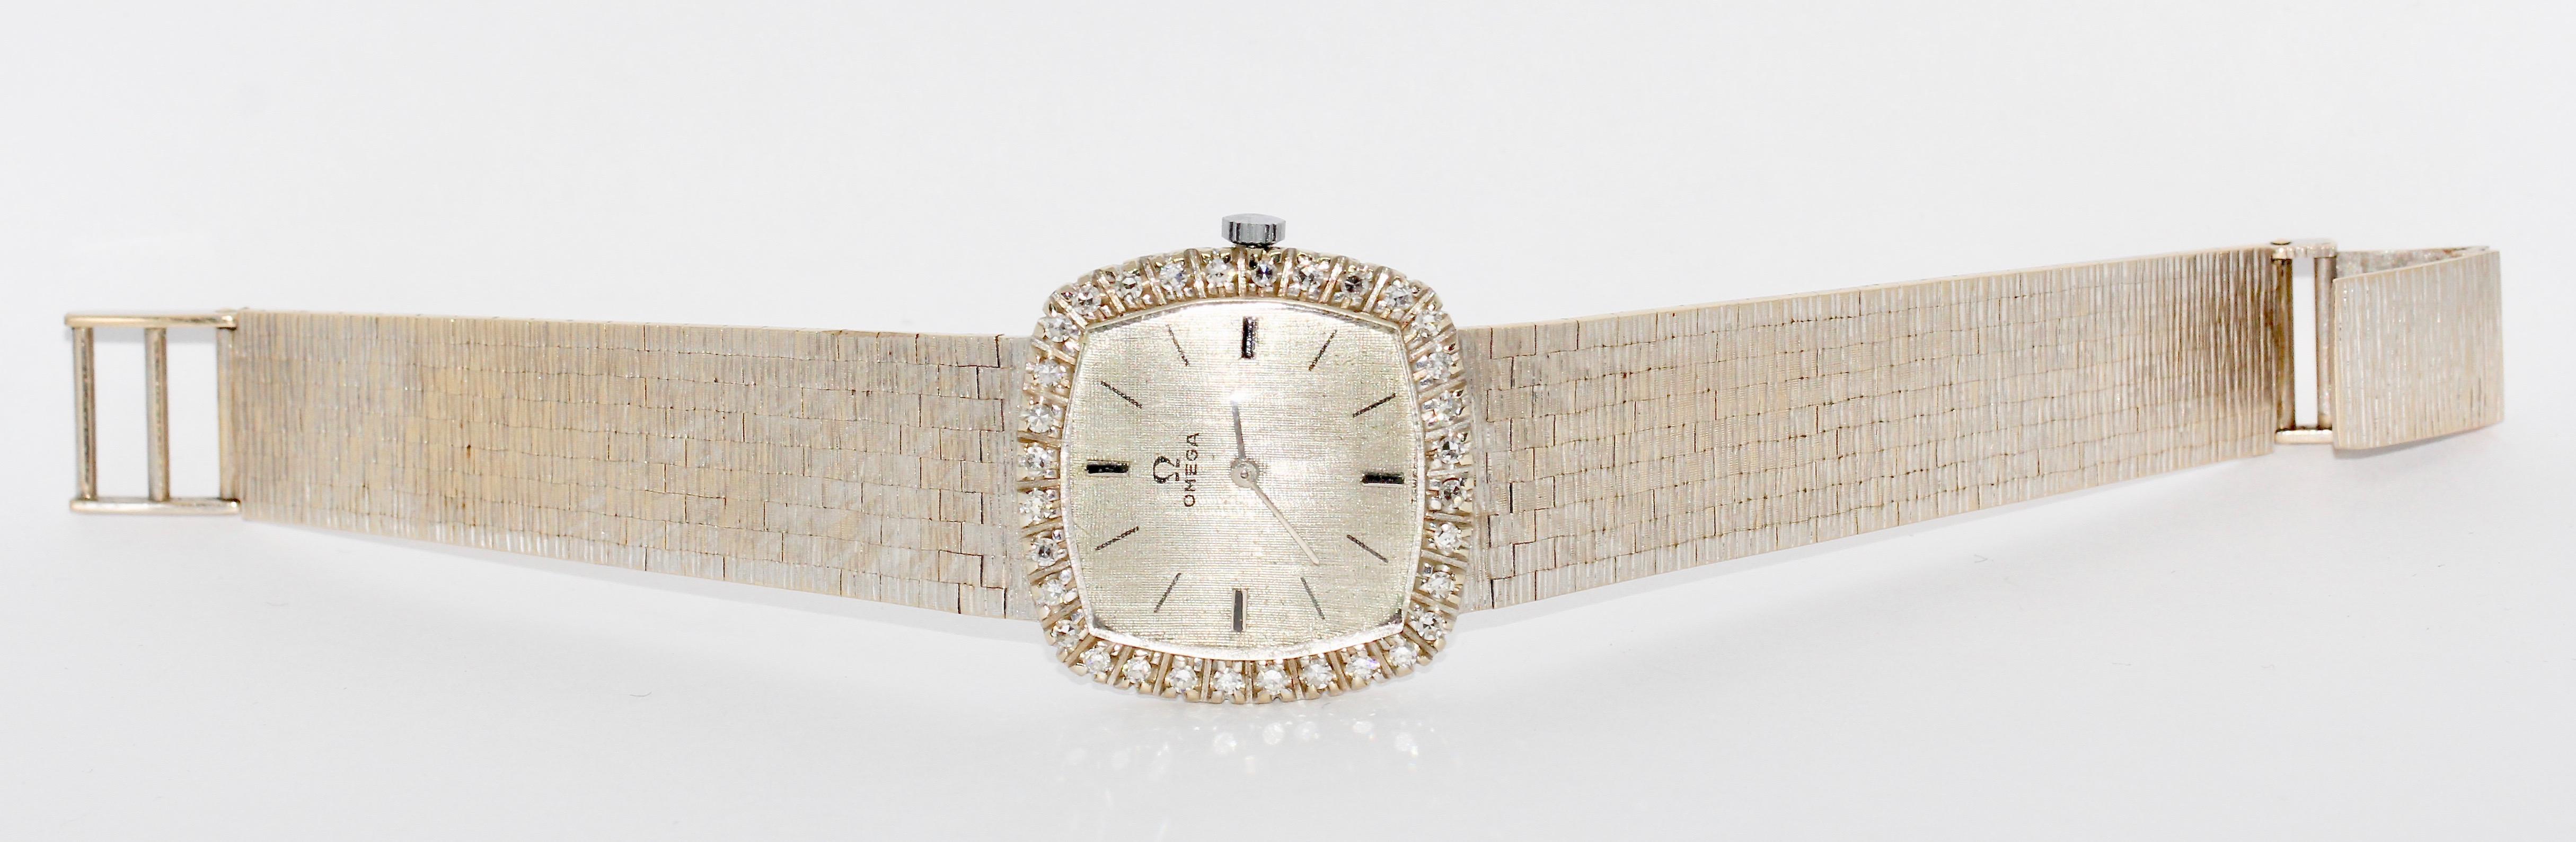 Omega Ladies Wrist Watch, 18 Karat White Gold and Diamonds, manual winding.

Including certificate of authenticity.